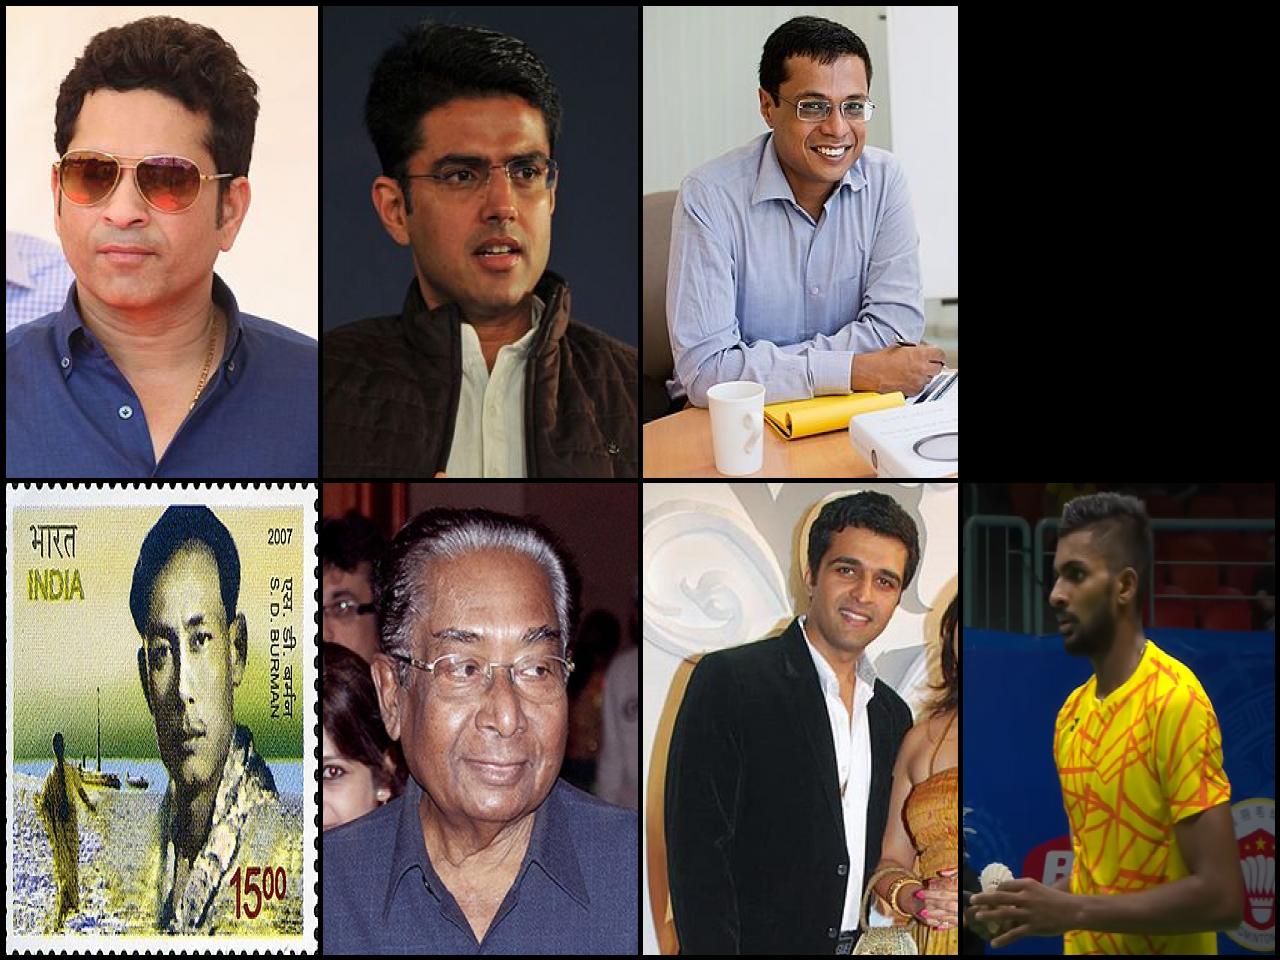 List of Famous people named <b>Sachin</b>